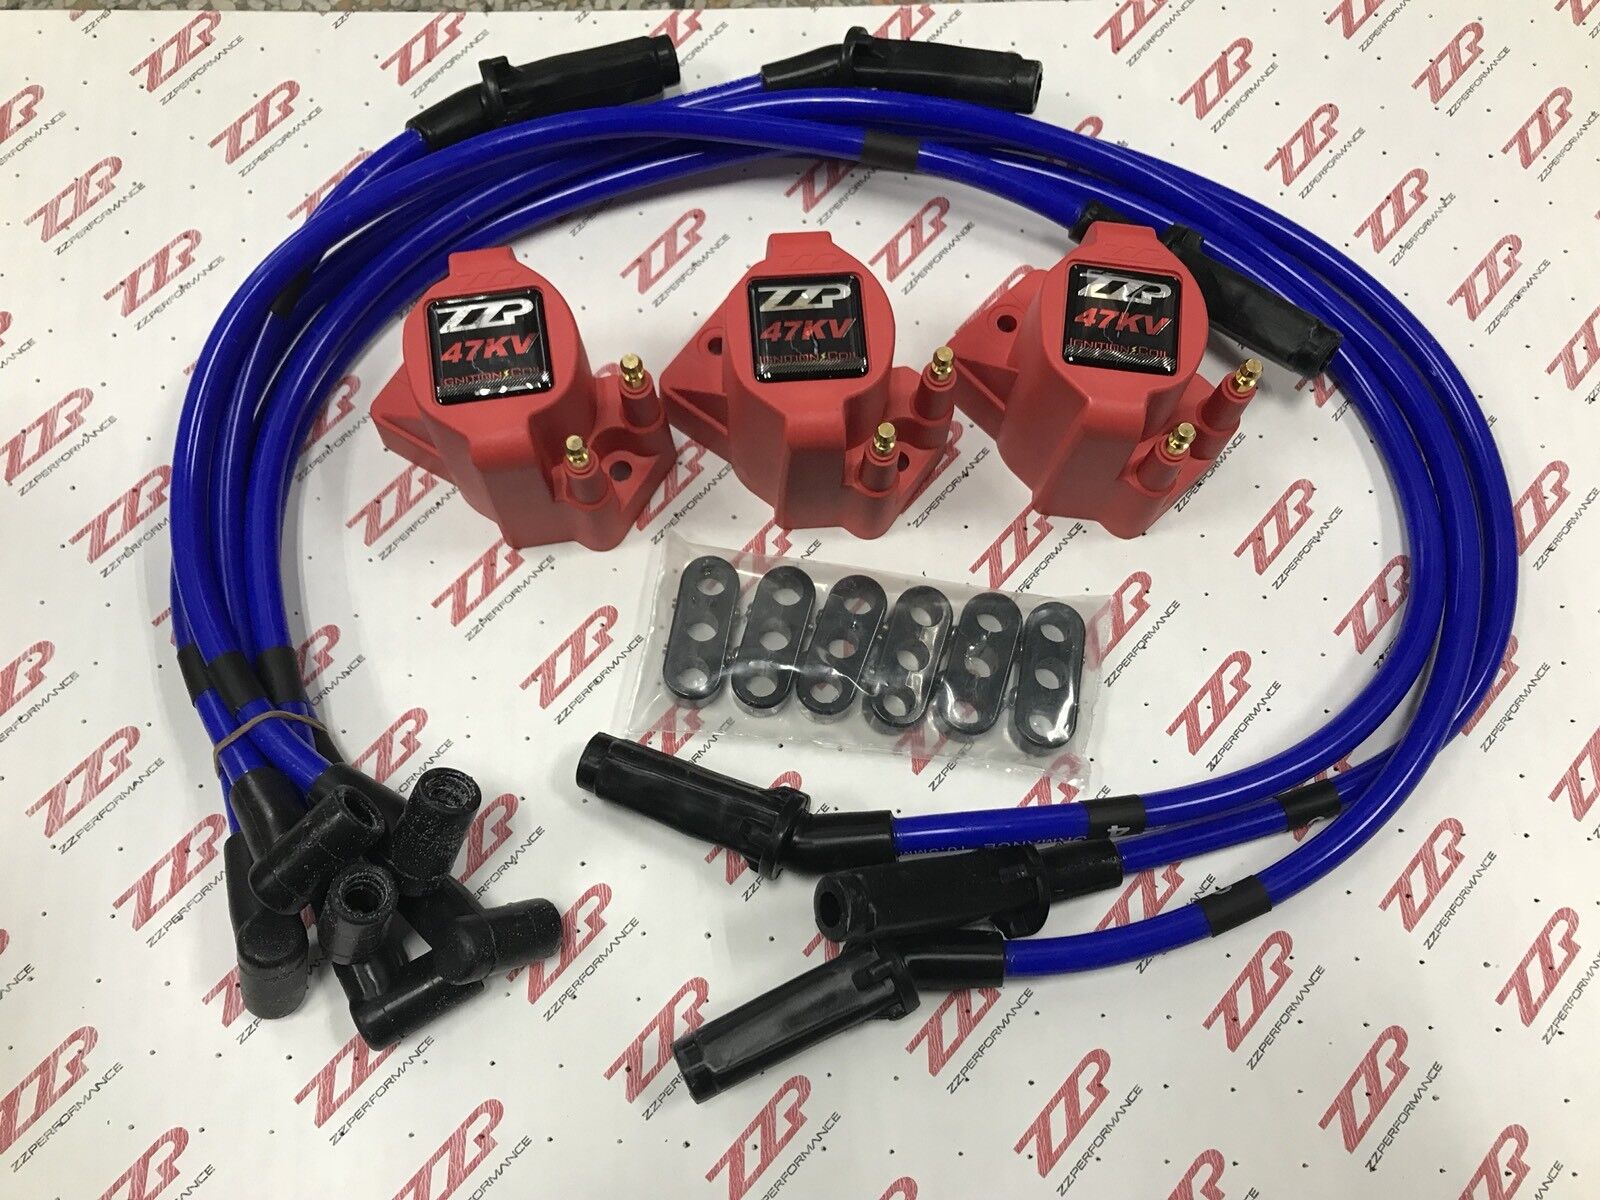 ZZPerformance 3800 High Voltage Coil Packs + 10.5mm Blue Spark Plug Wire Combo